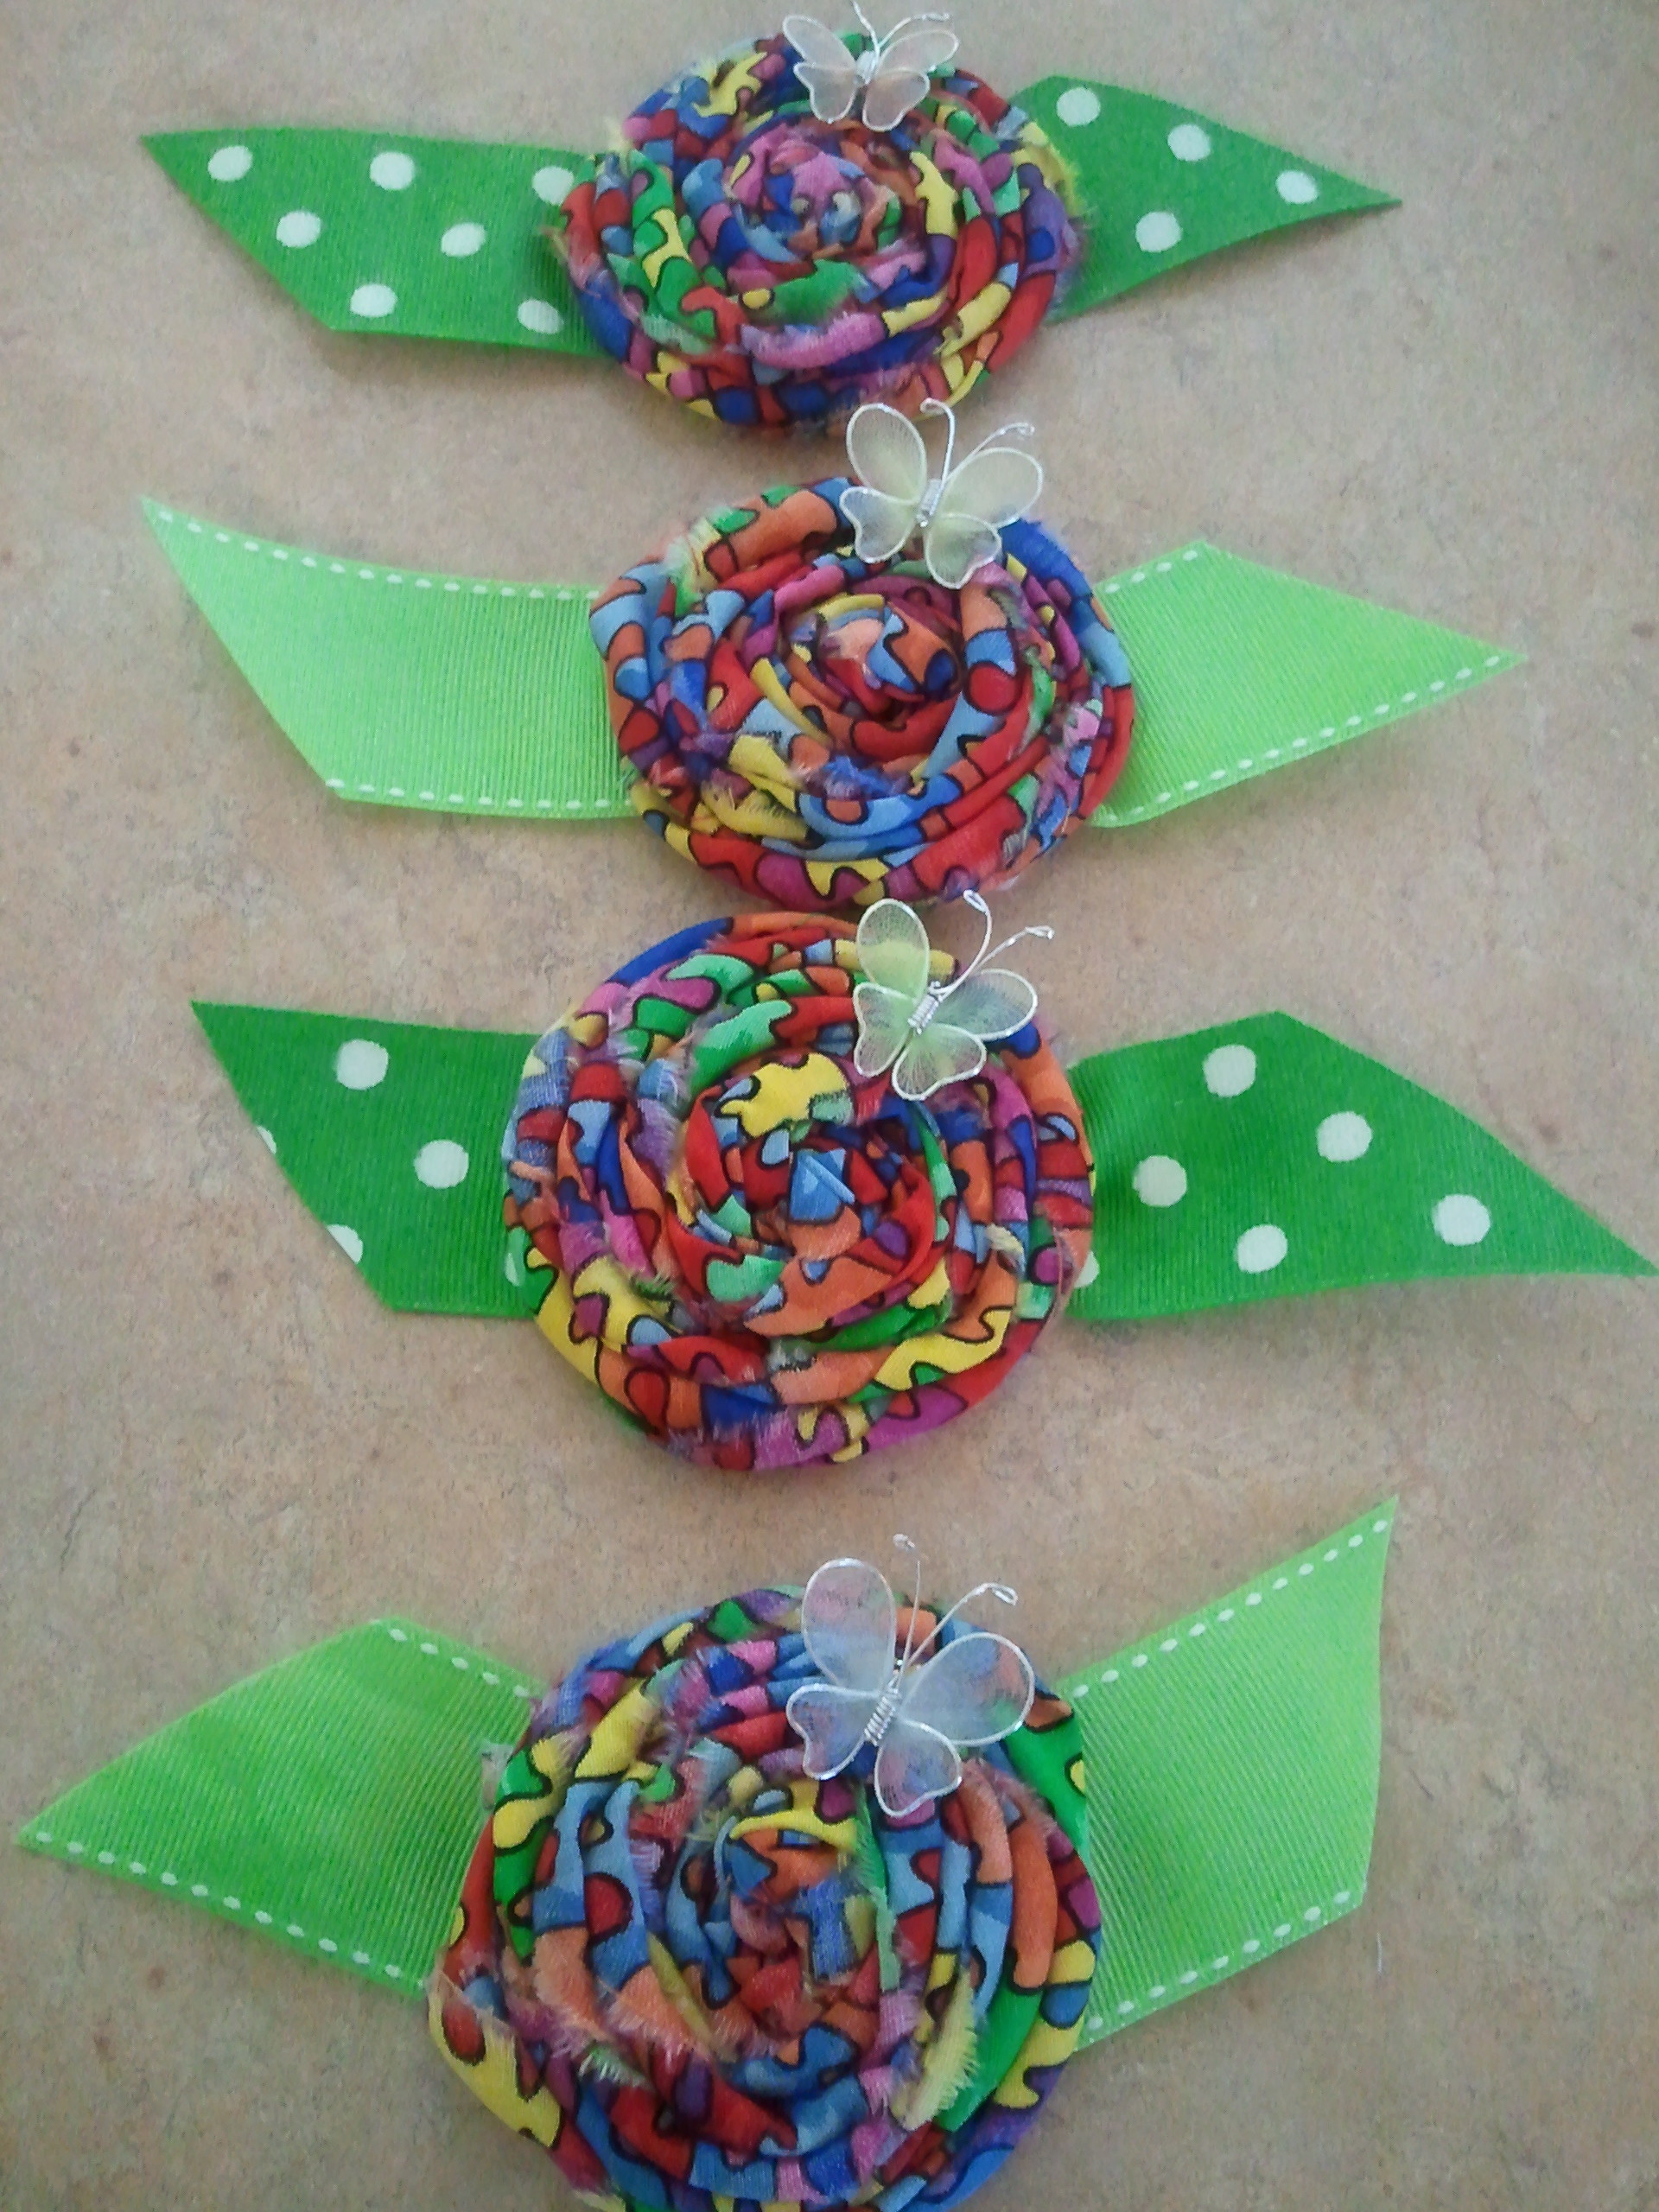 If you can't wait for your flowers to bloom, make your own rolled flowers! Quick and easy project, perfect for spring!